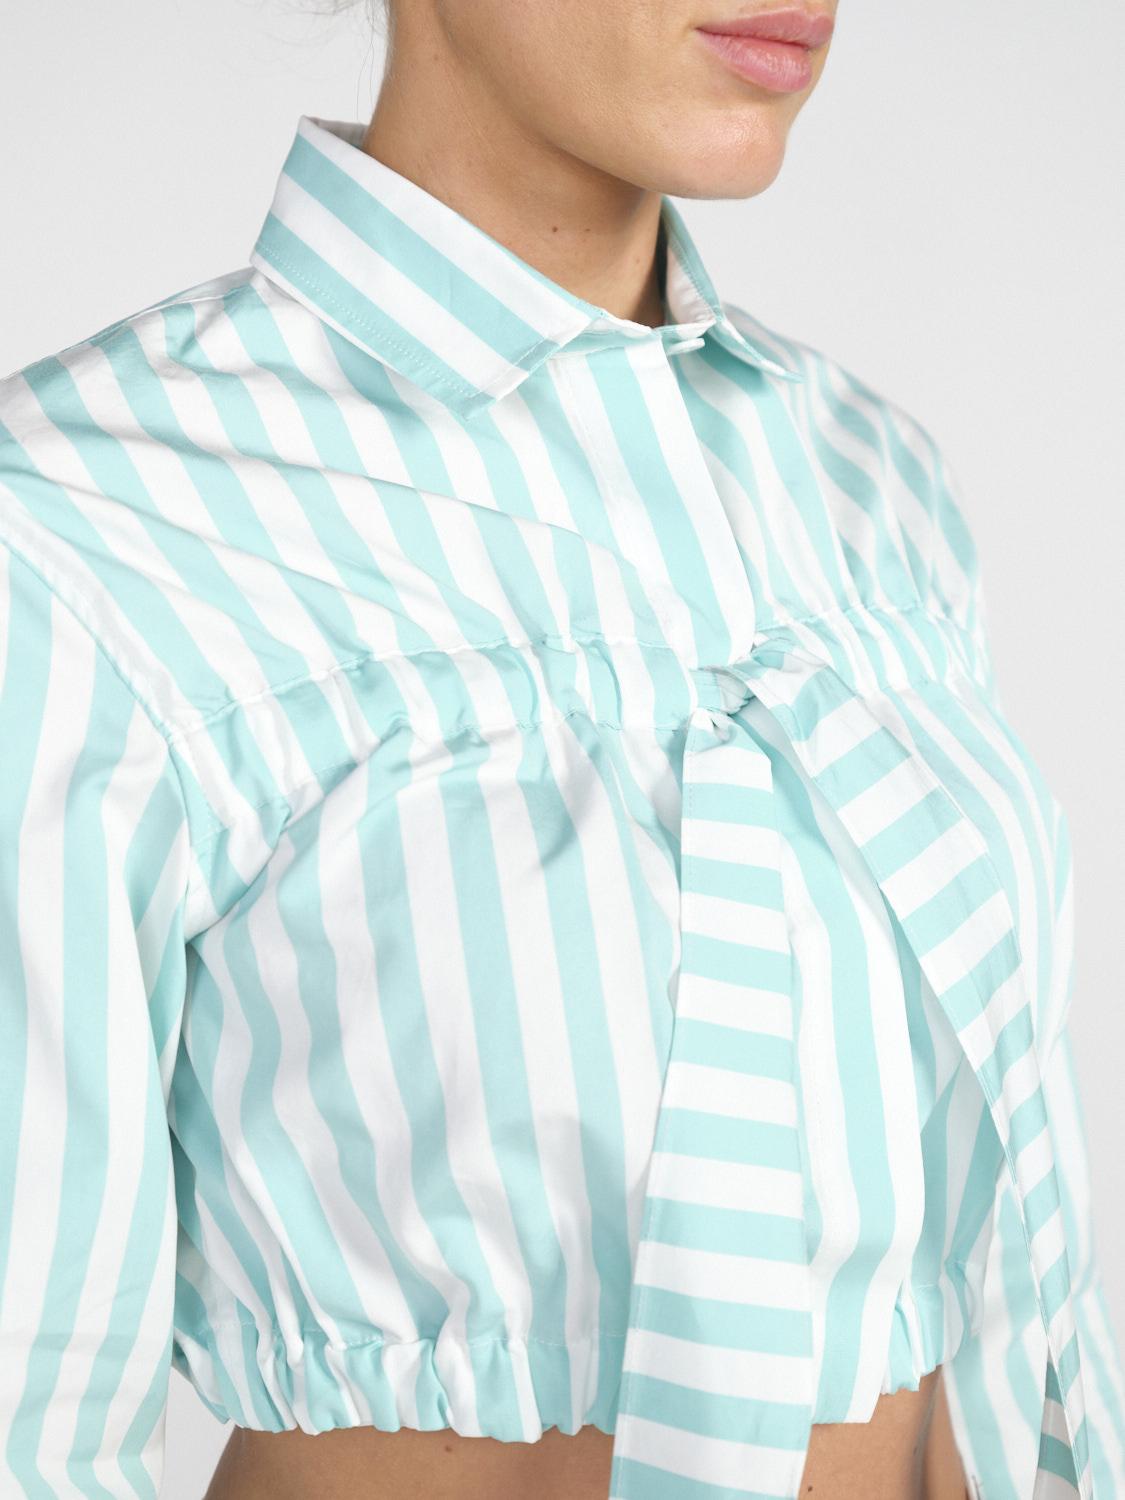 Patou Cropped bow shirt – Gecroppte Baumwoll-Bluse mint 36